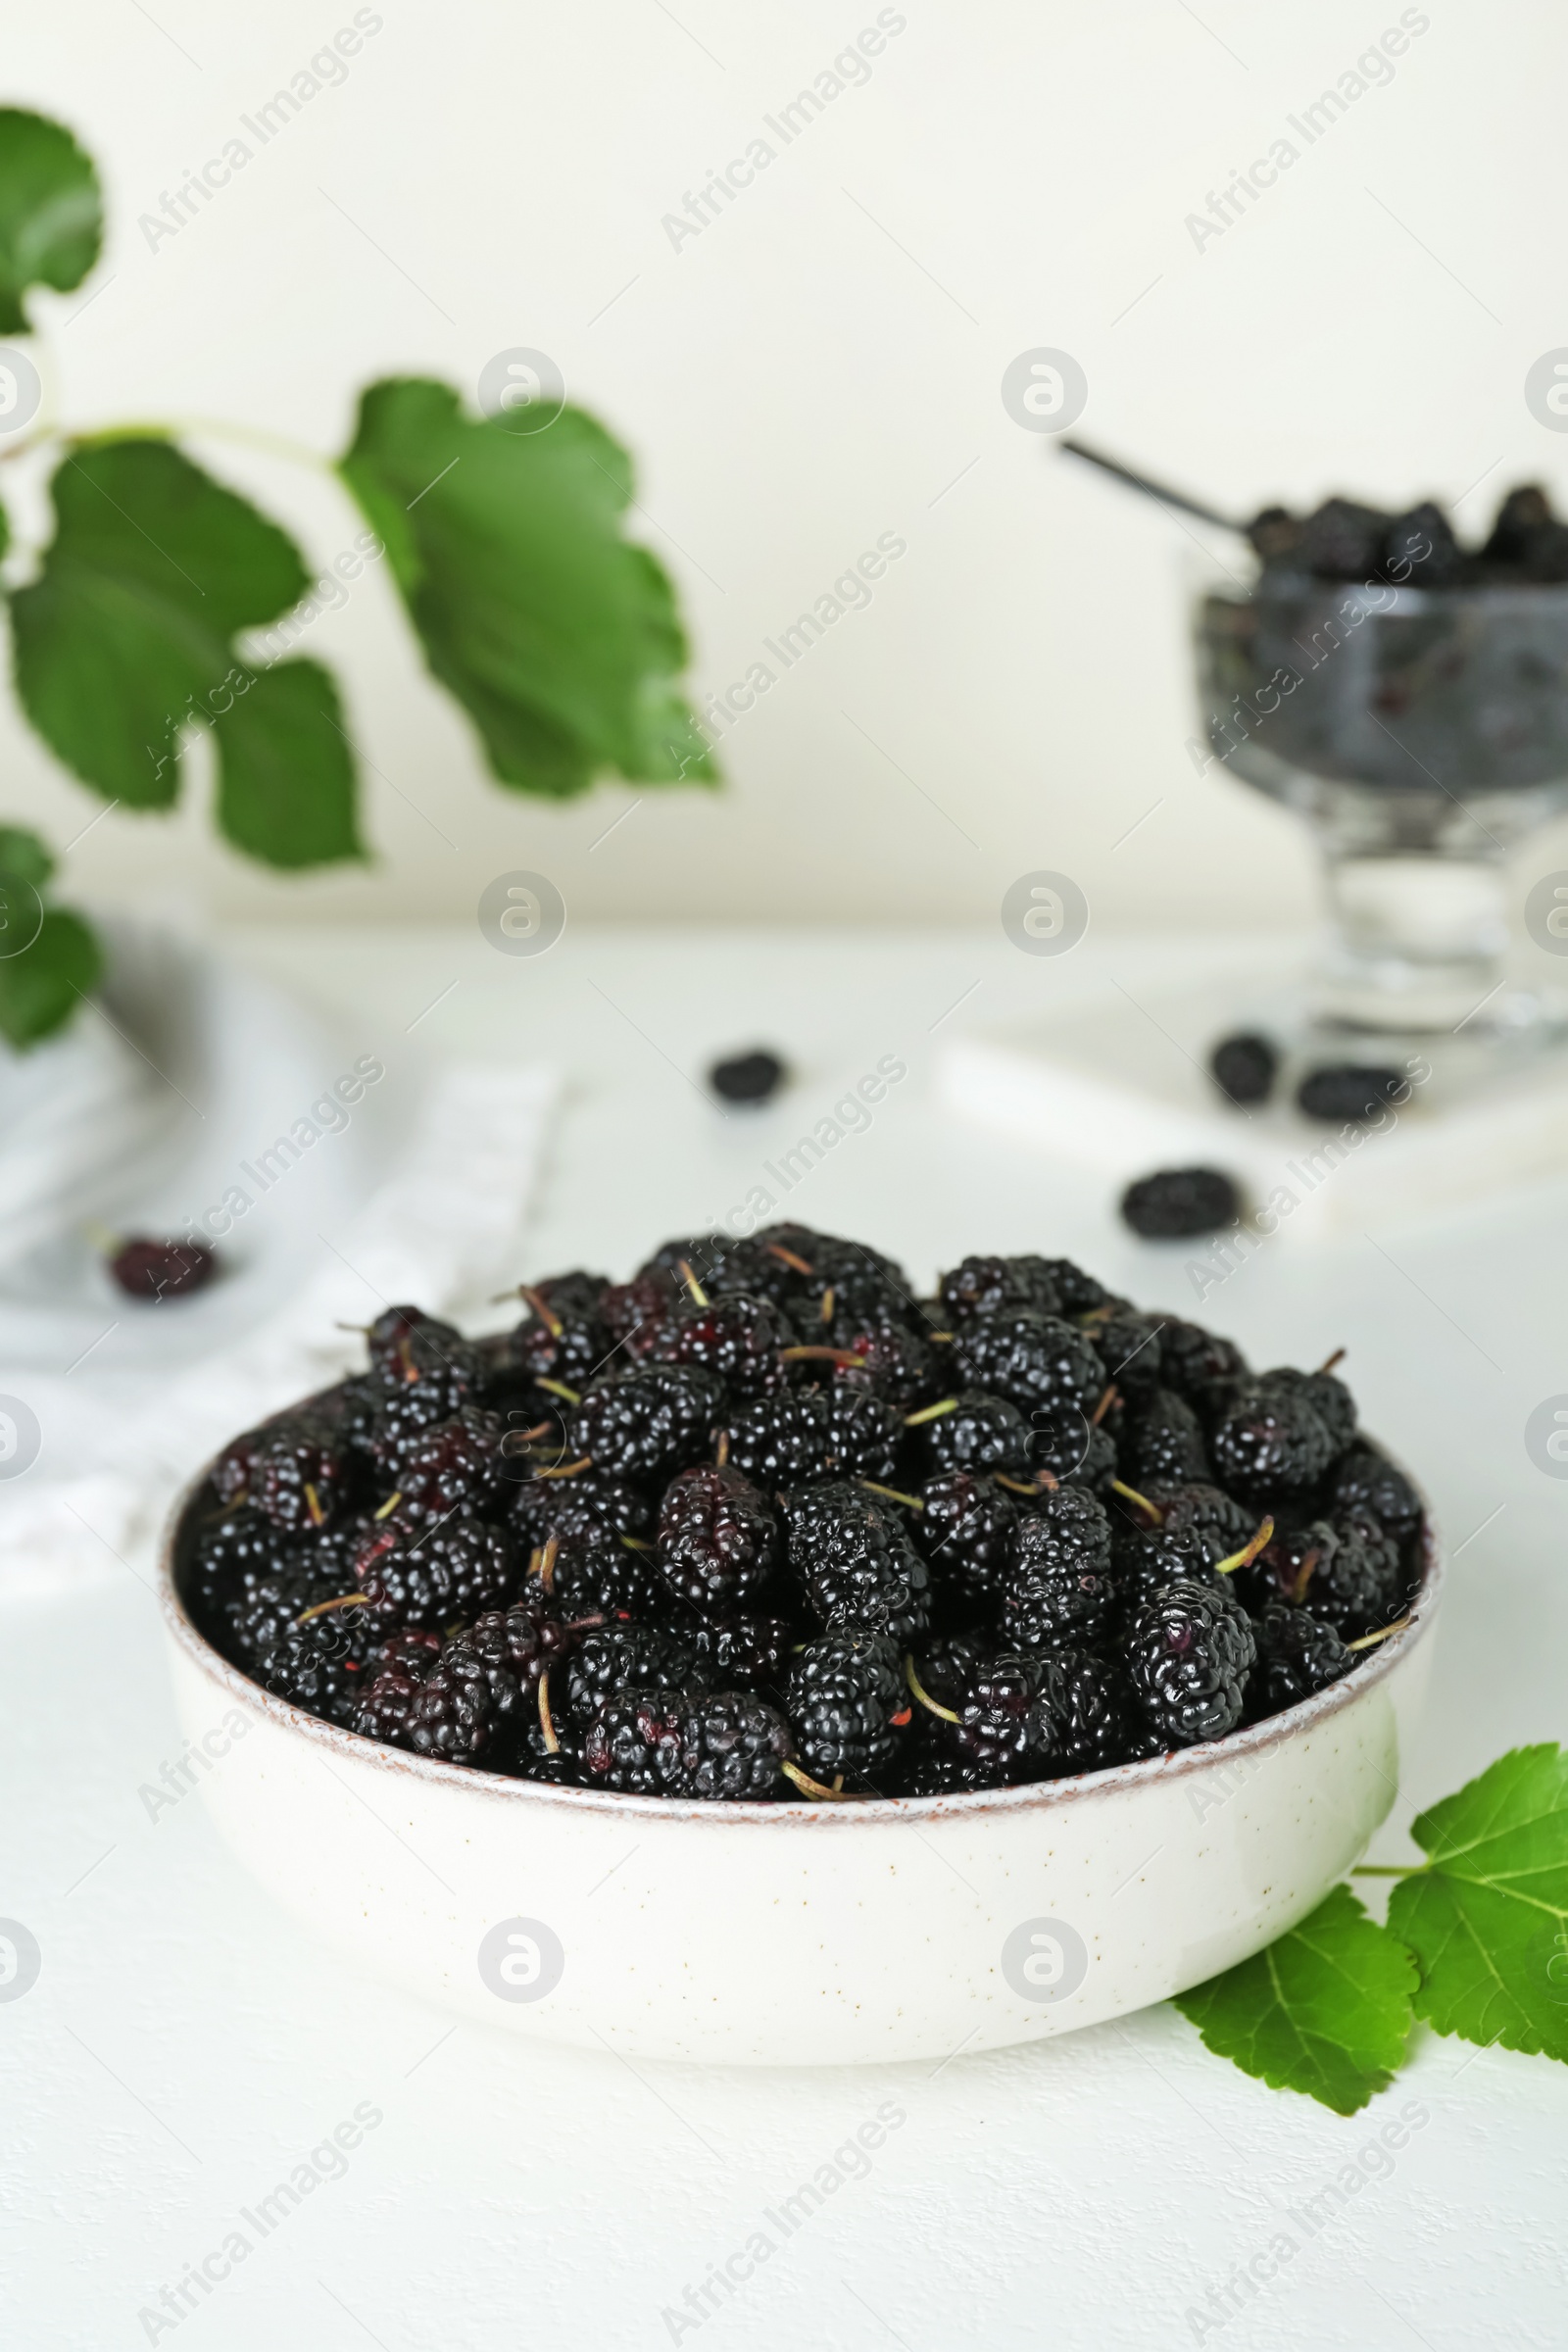 Photo of Bowl of delicious ripe black mulberries on white table